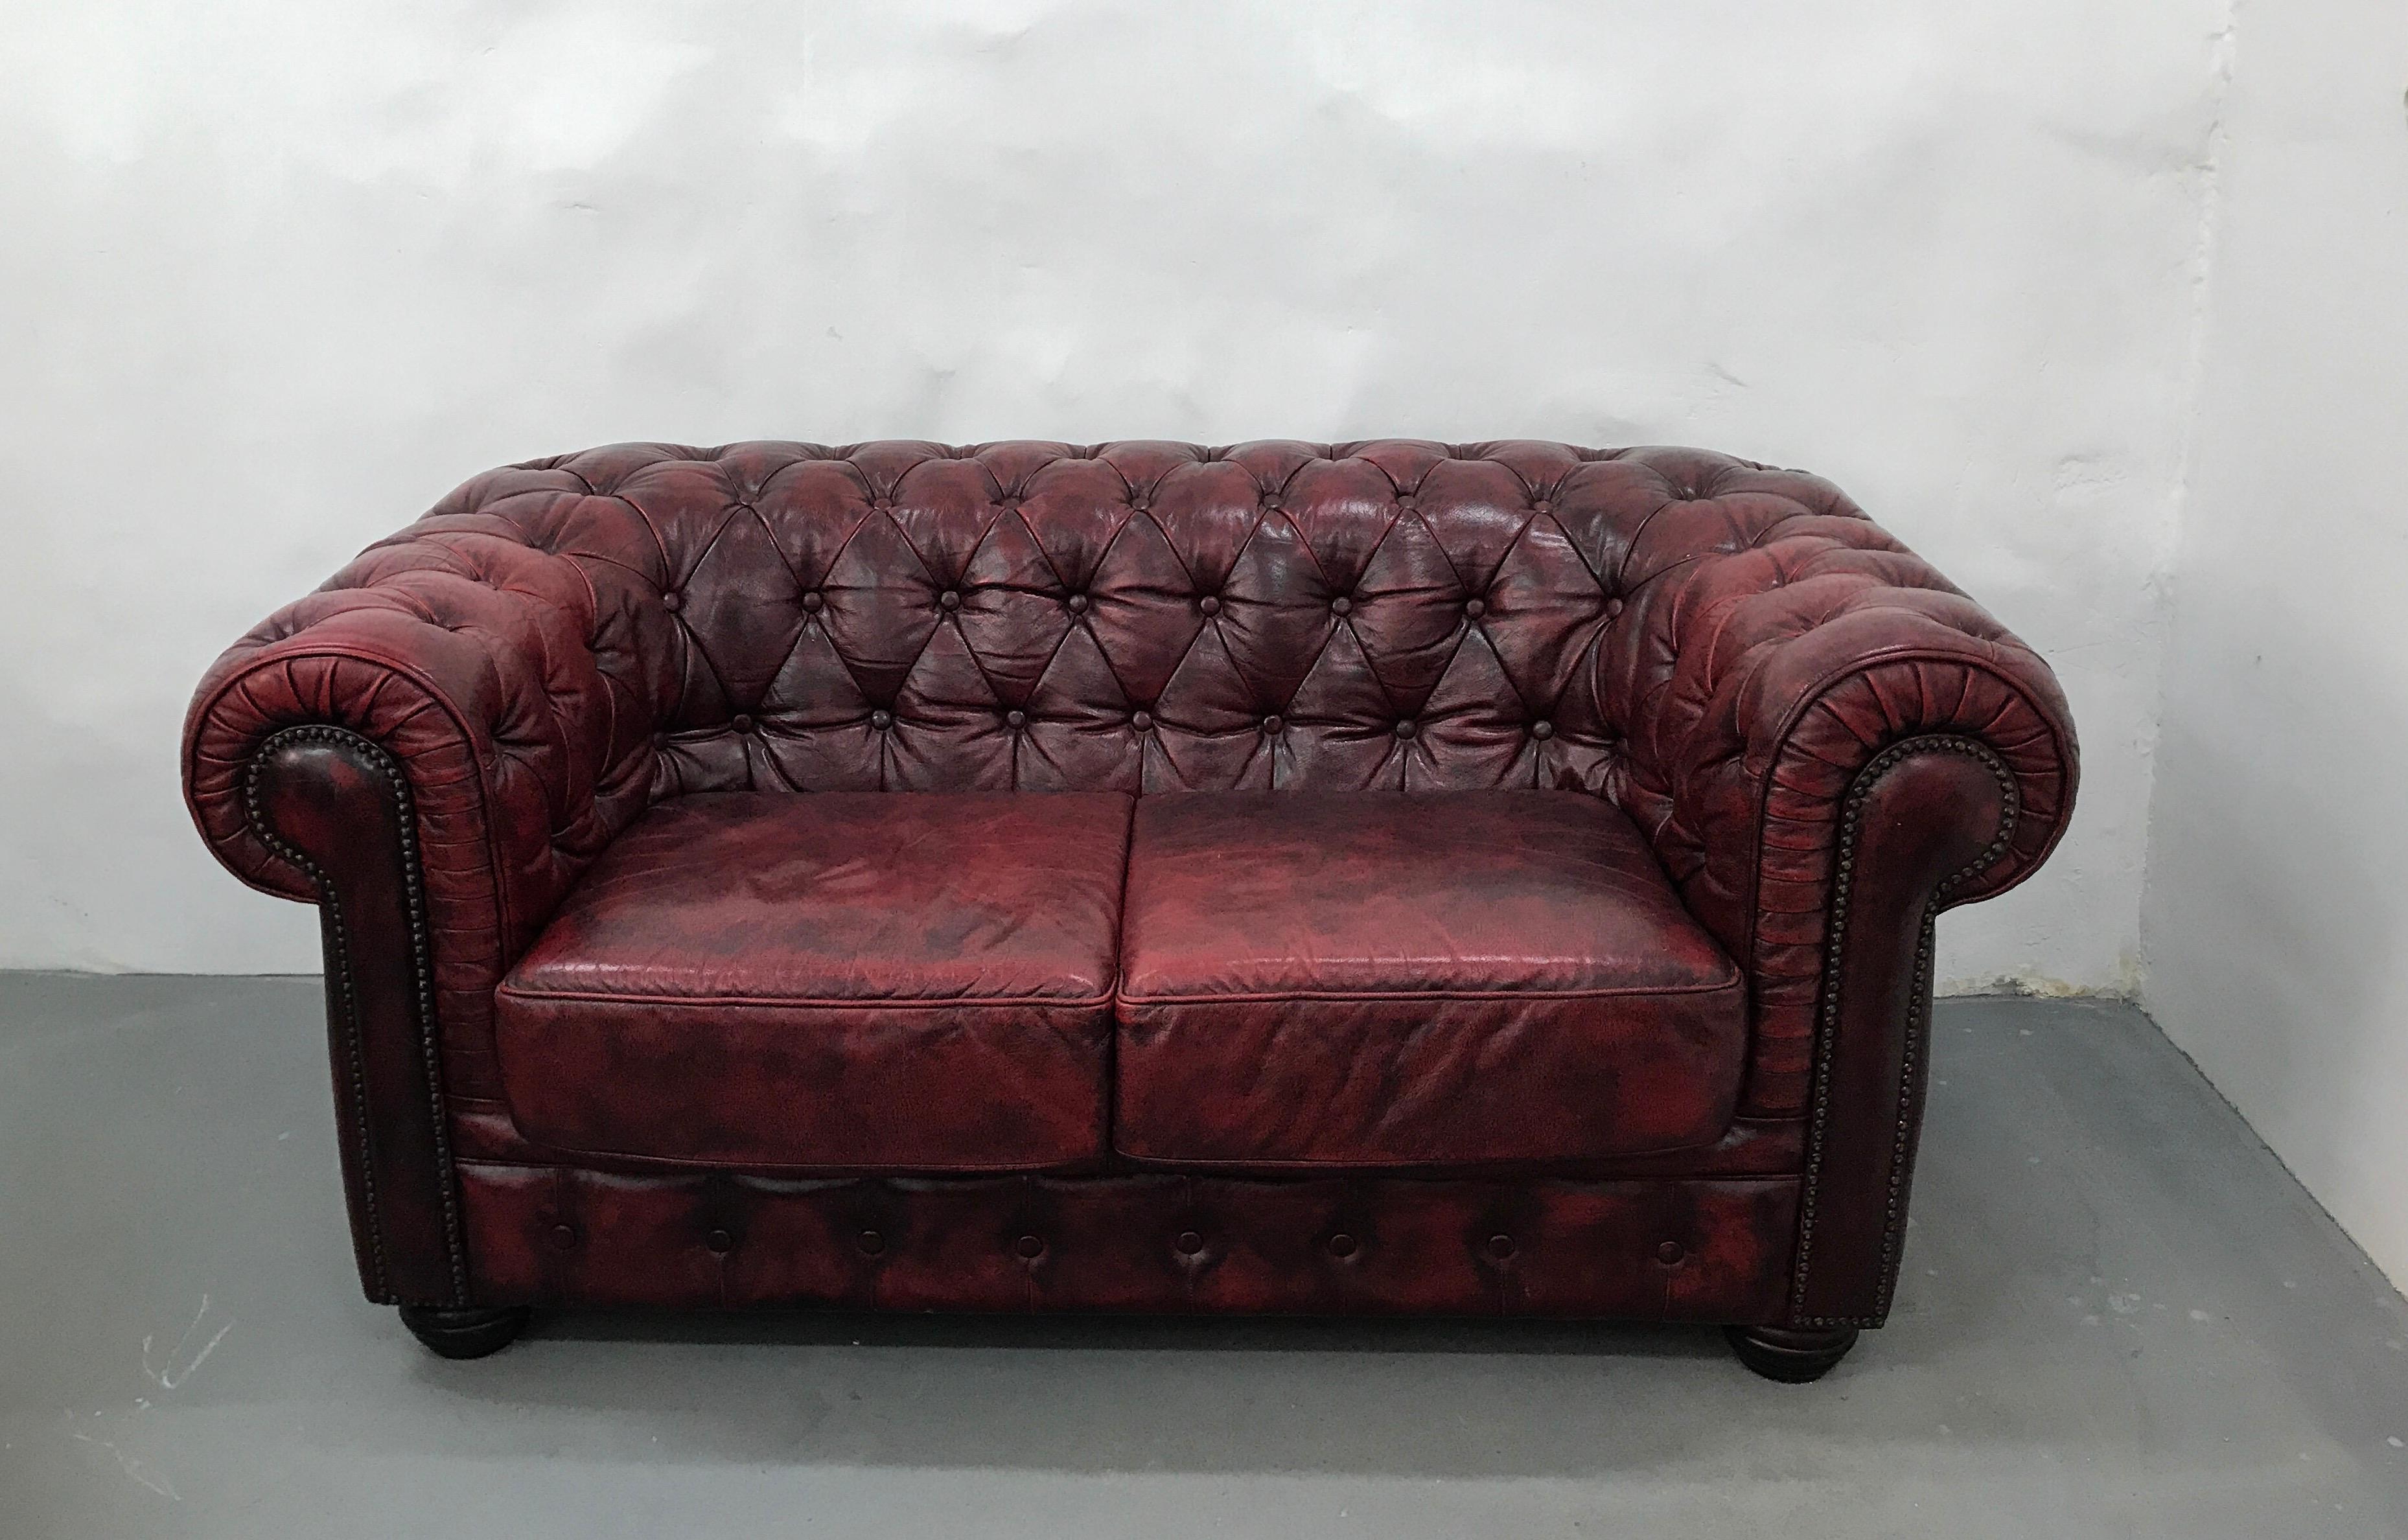 Beautiful 2-seaster original vintage oxblood leather chesterfield sofa by Rubelli from Italy. This sofa is great condition for its age and gets better with time. Legs are wooden, round. Color: red brick.
Age: Second half of the 20th century.
   